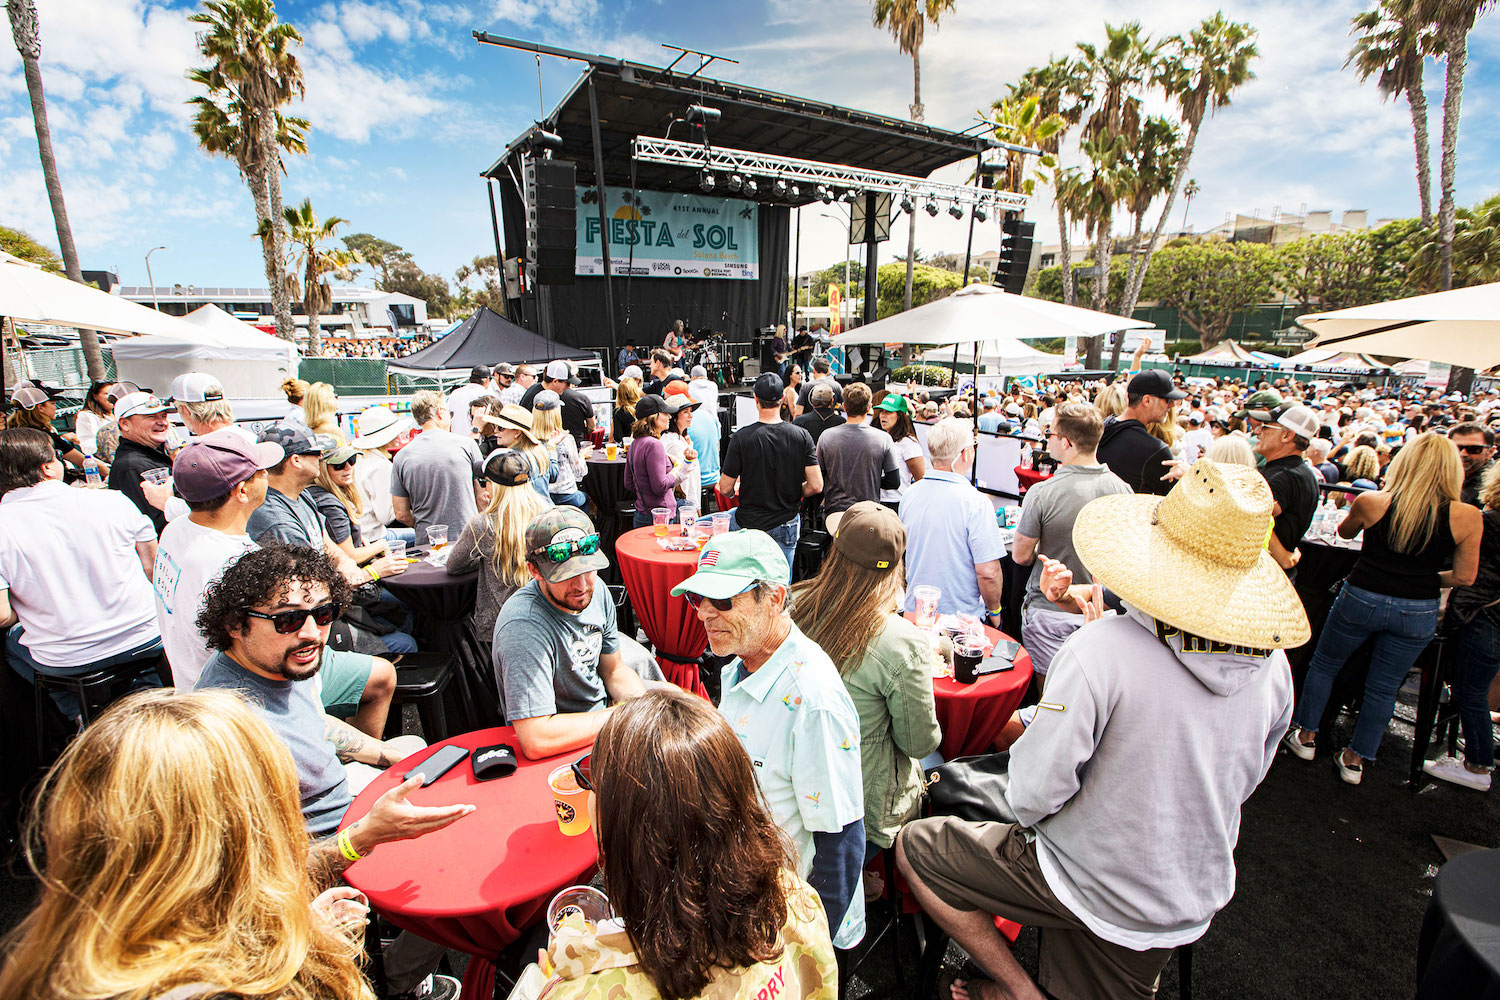 Fiesta Del Sol music festival event in Solana Beach in North County San Diego this weekend 